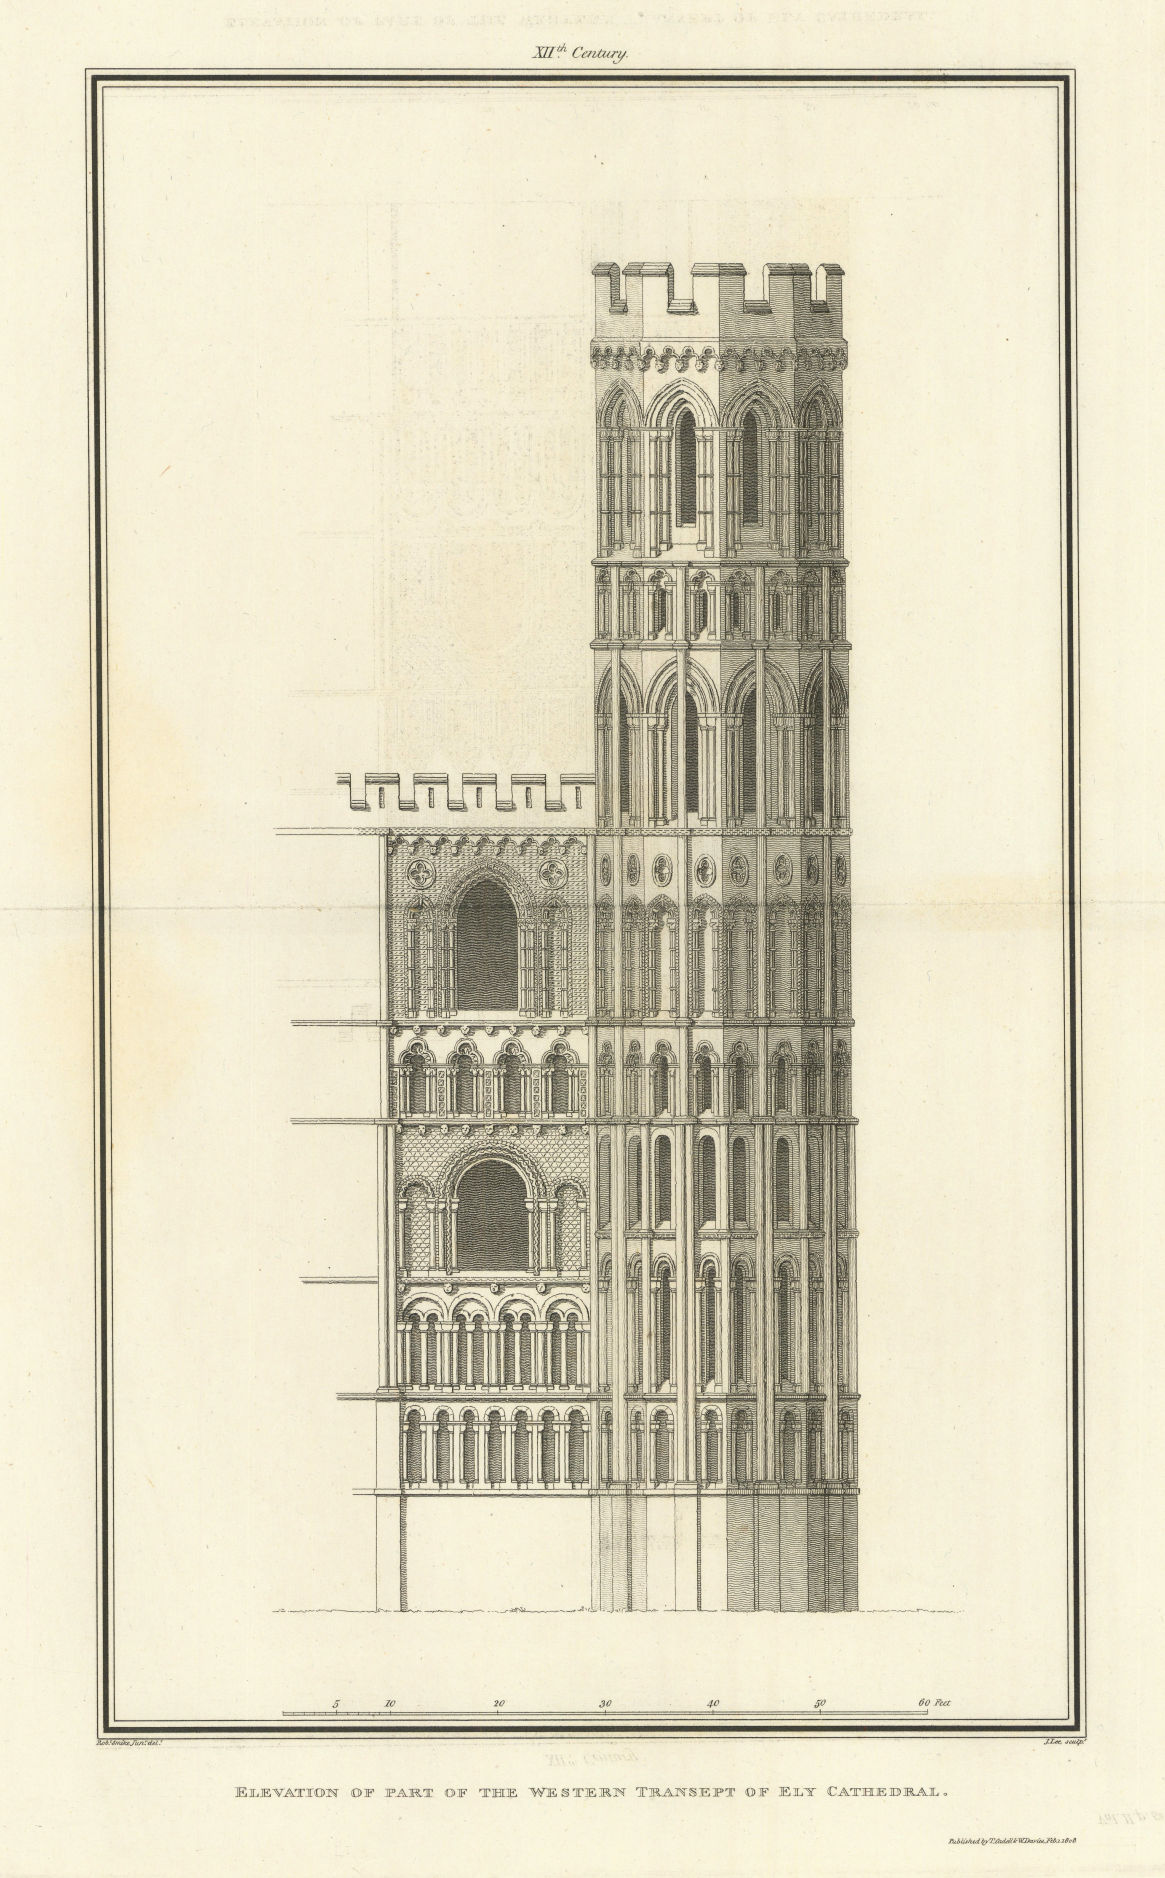 Associate Product Elevation of part of the Western Transept of Ely Cathedral. SMIRKE 1810 print